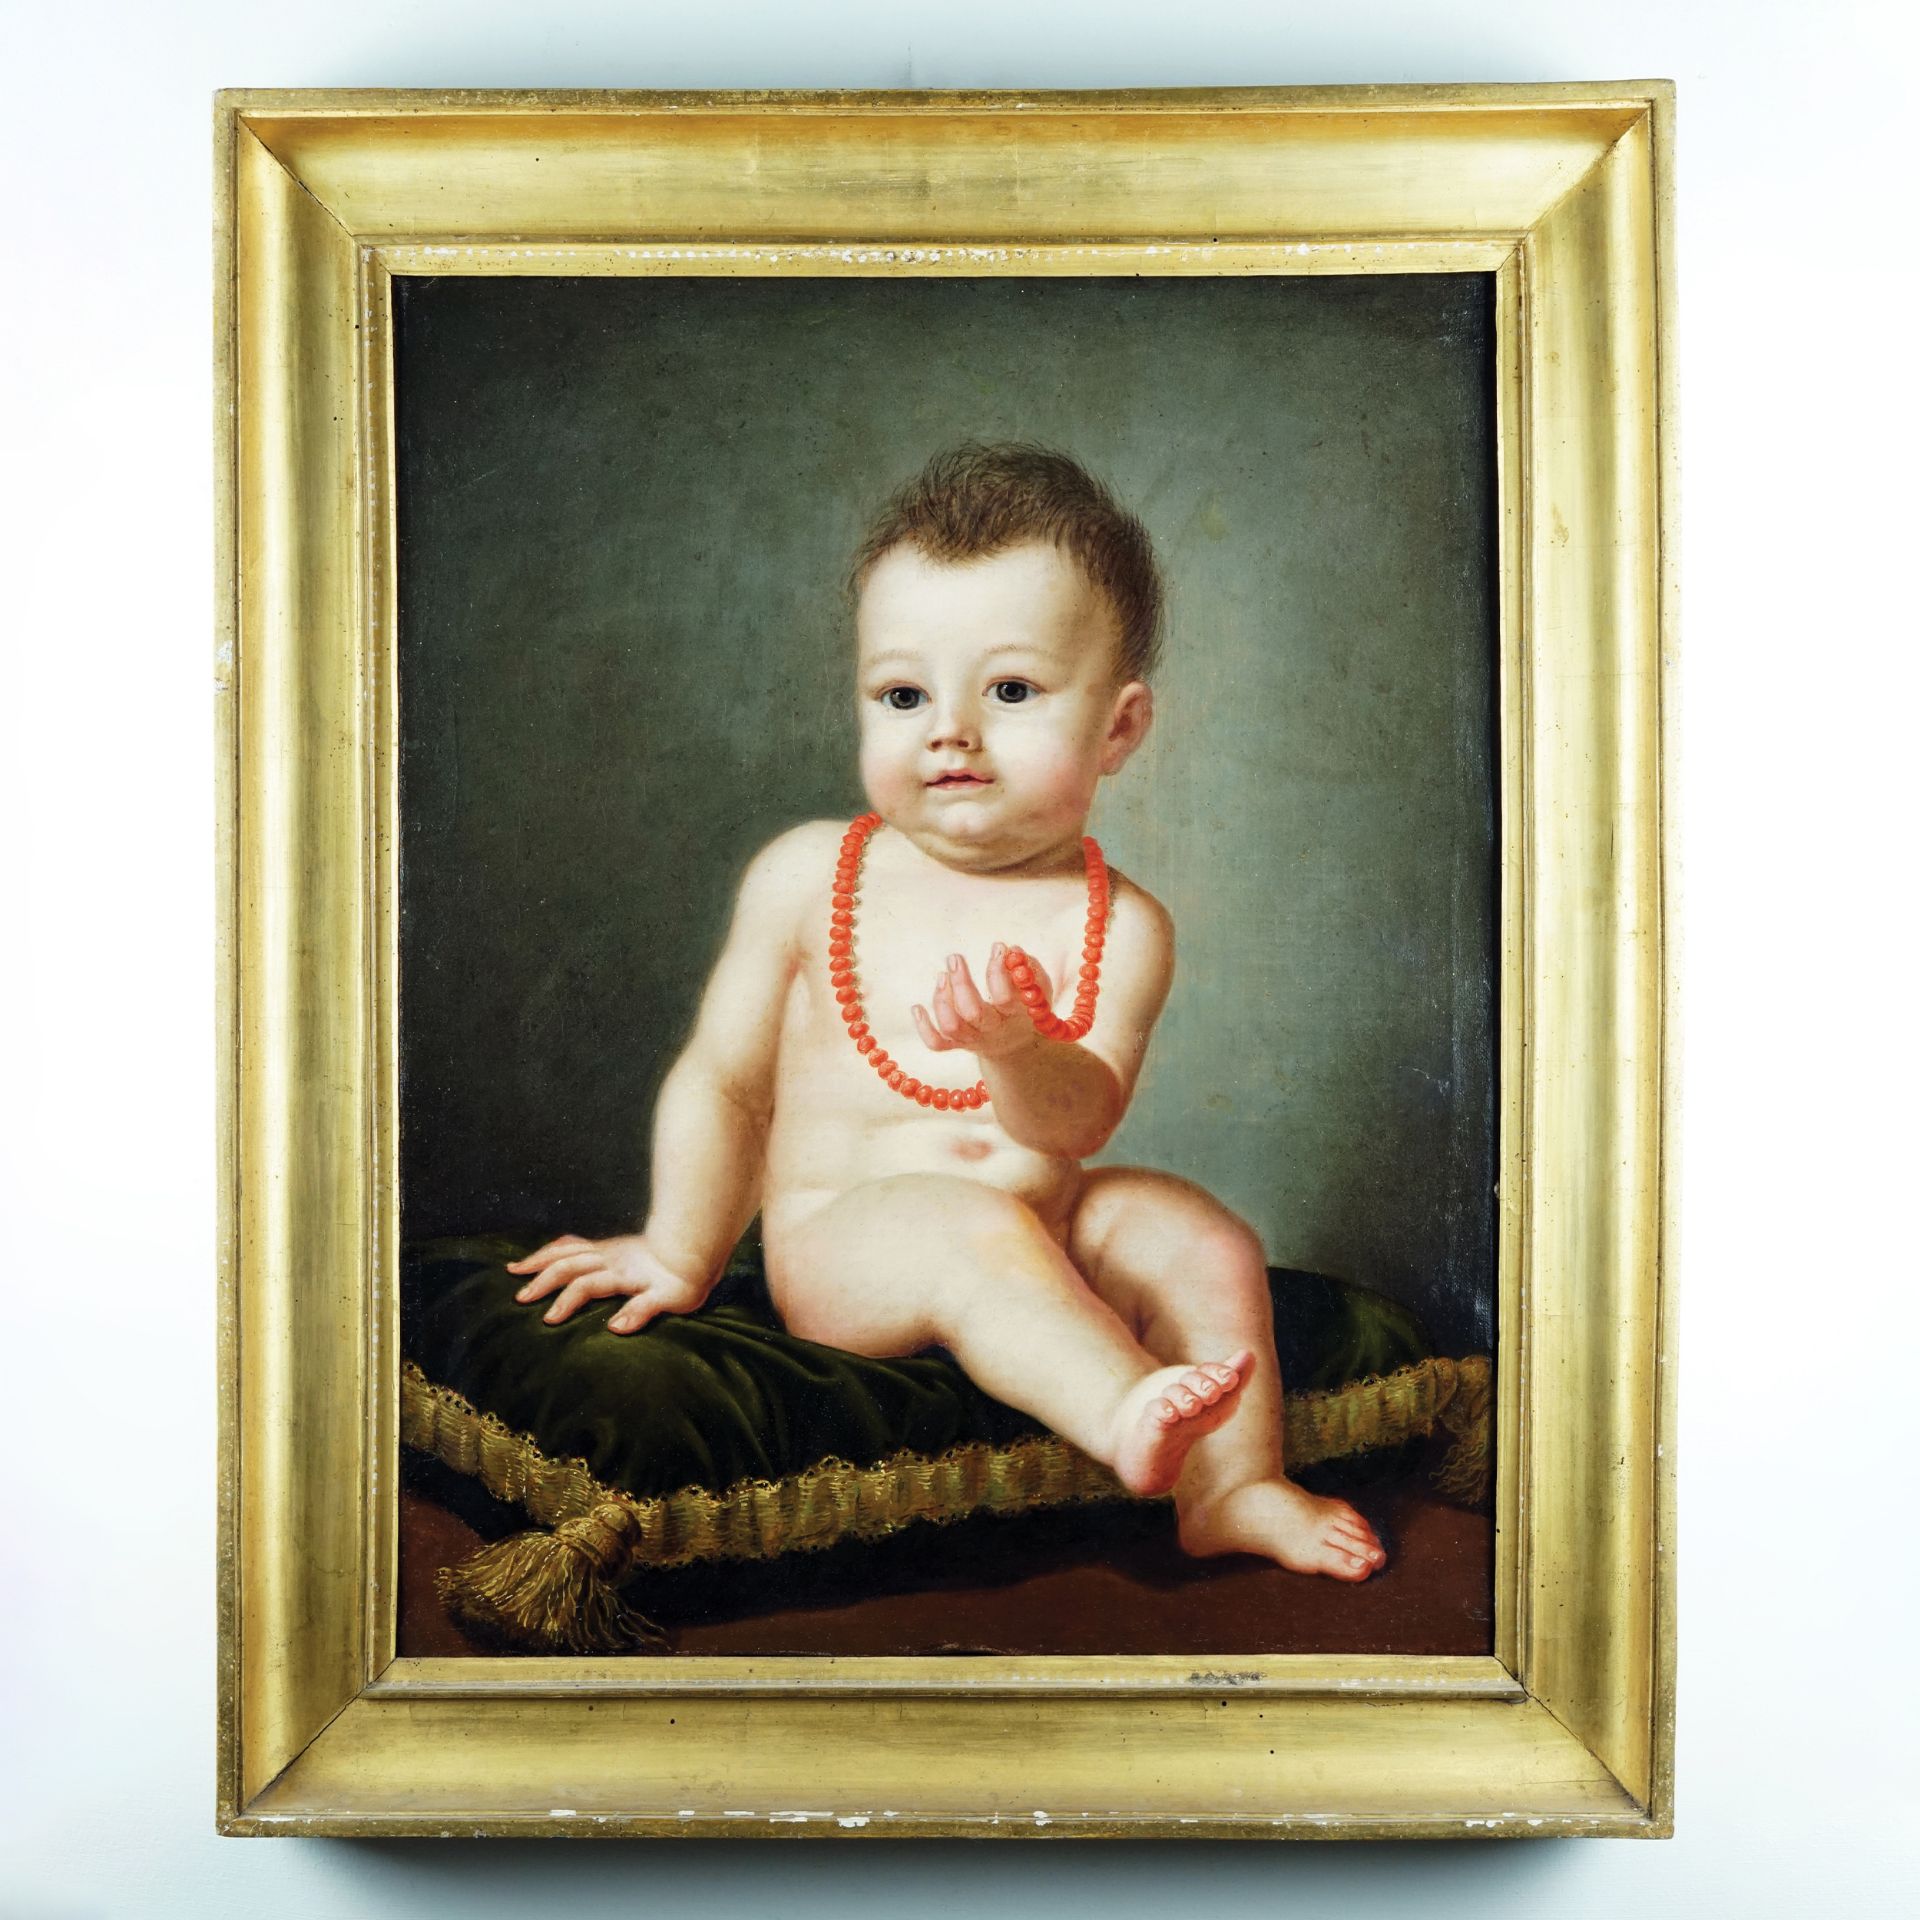 Early 19th century painter Sitting baby with a coral necklaceoil on canvas, 62,5x50cm.